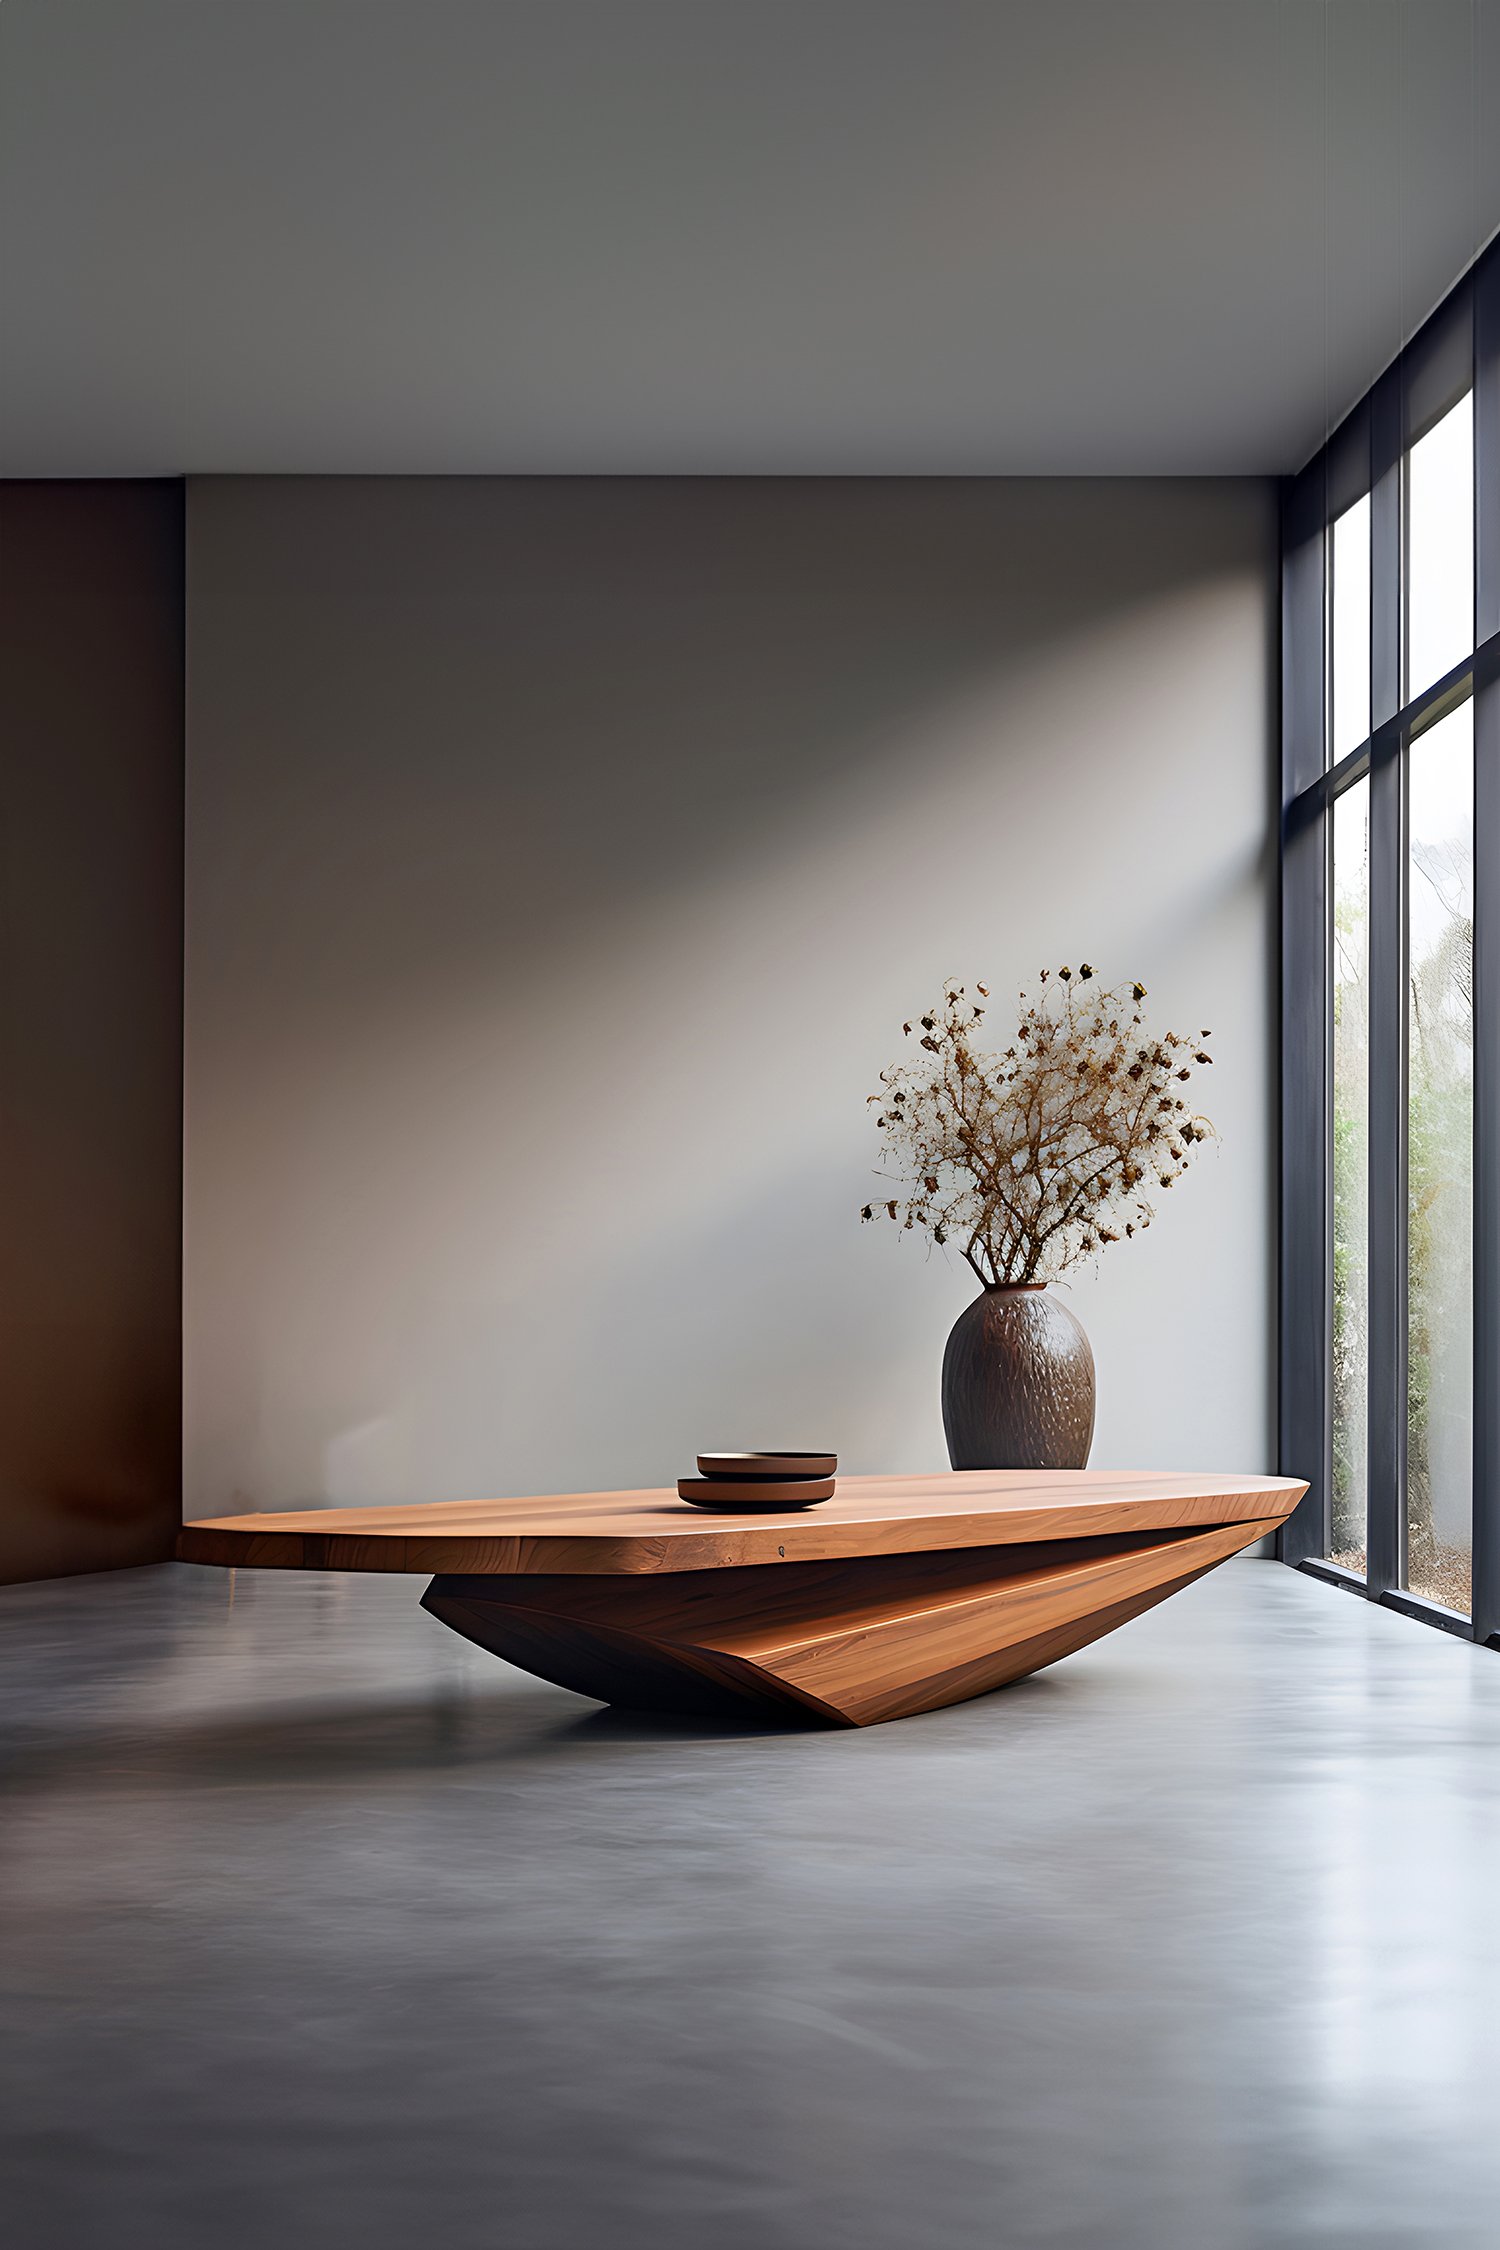 Oval Coffee Table Made of Solid Wood, Center Table Solace S18 by Joel Escalona — 6.jpg